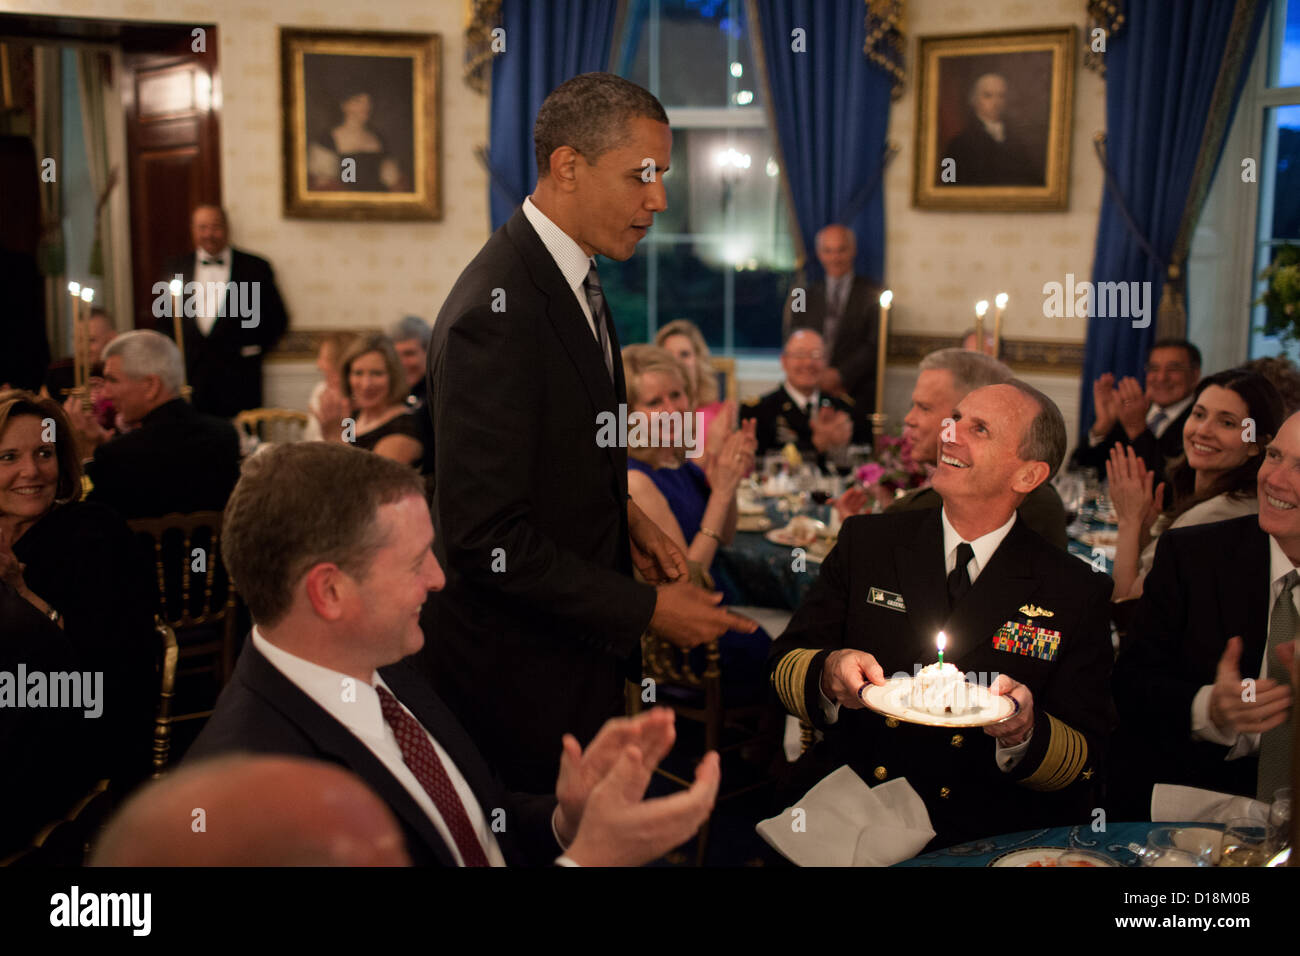 President Barack Obama presents a birthday cake to Admiral Jonathan Greenert, Chief of Naval Operations, during a dinner for Stock Photo